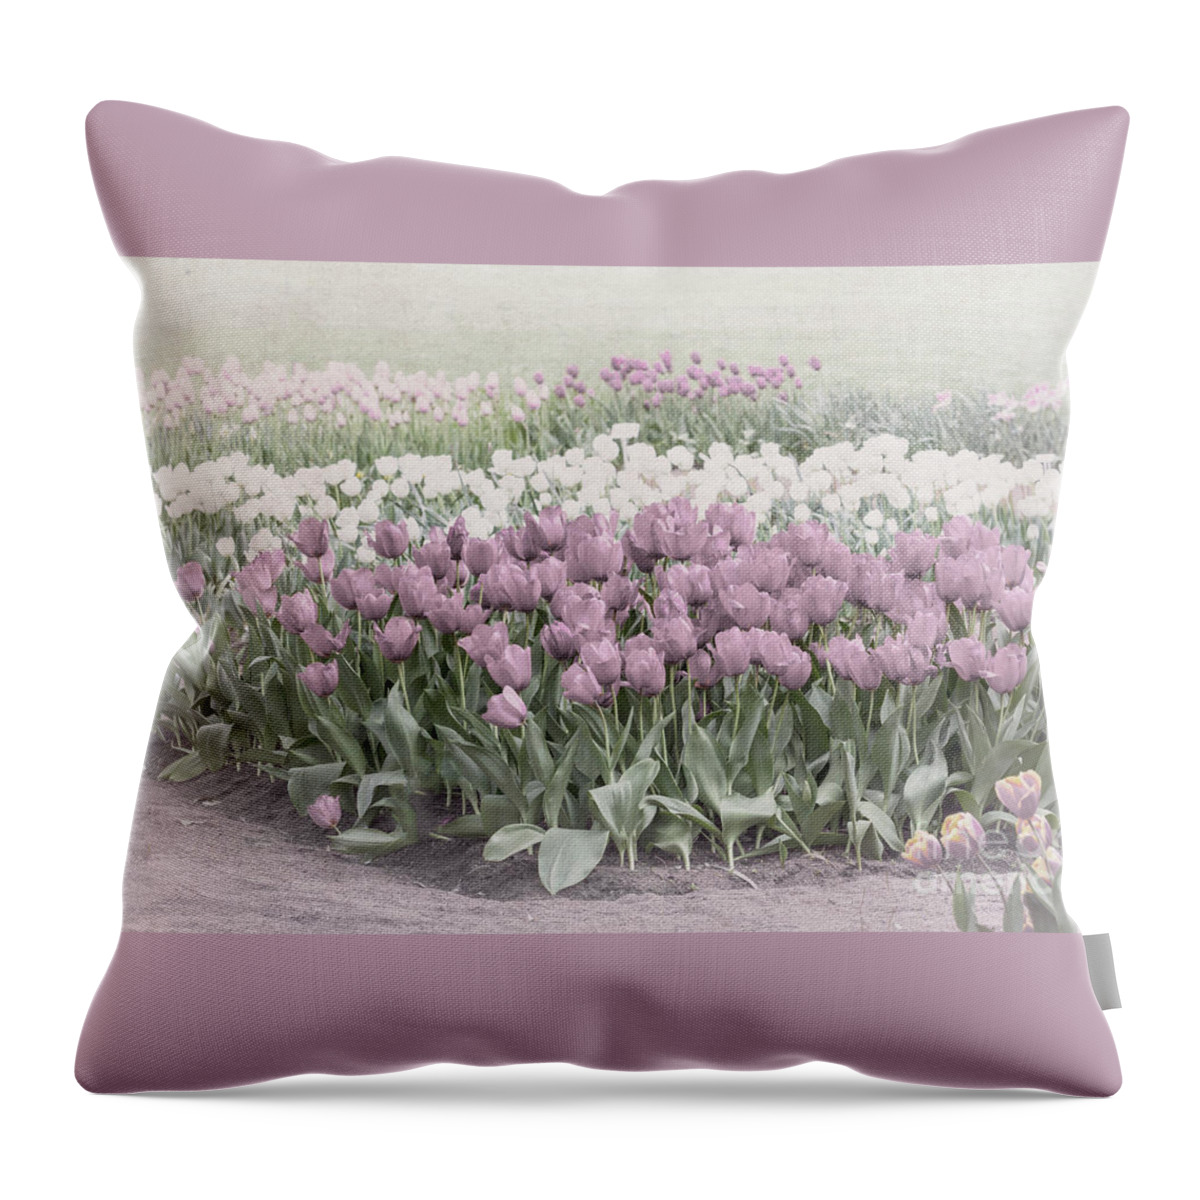 Pastel Throw Pillow featuring the photograph Pastel Tulips by Elaine Teague